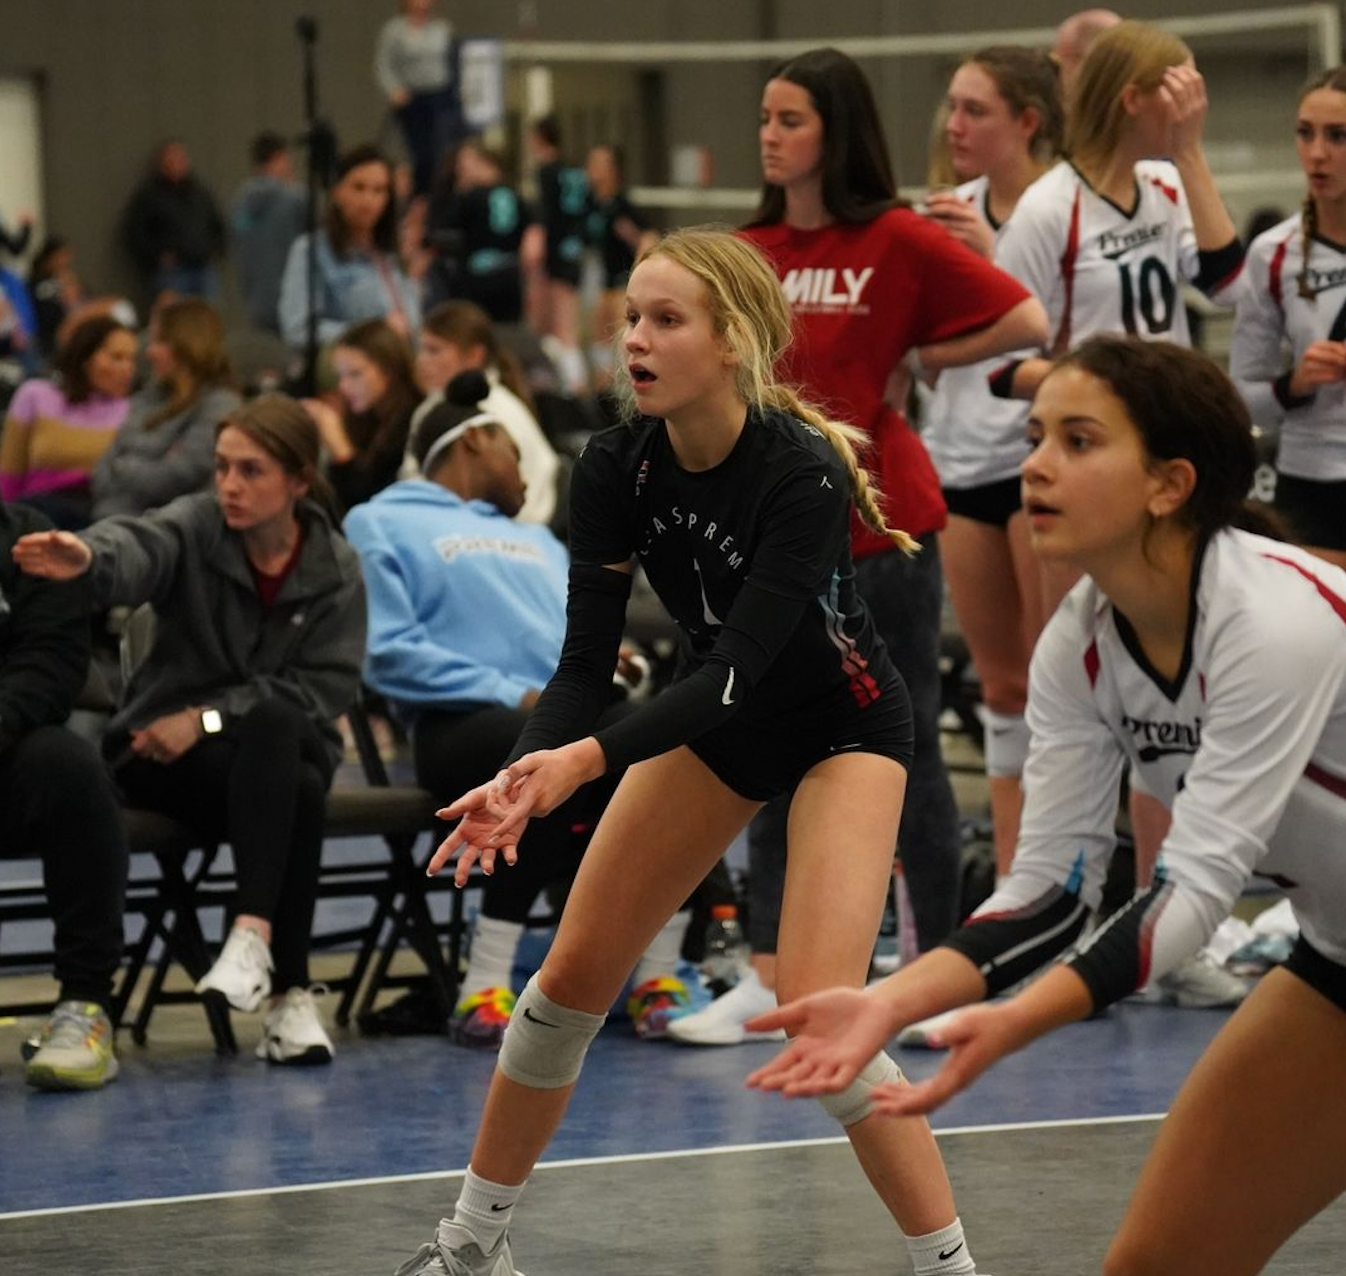 Long Sleeve Volleyball Jerseys: Performance, Style, and Functionality ...